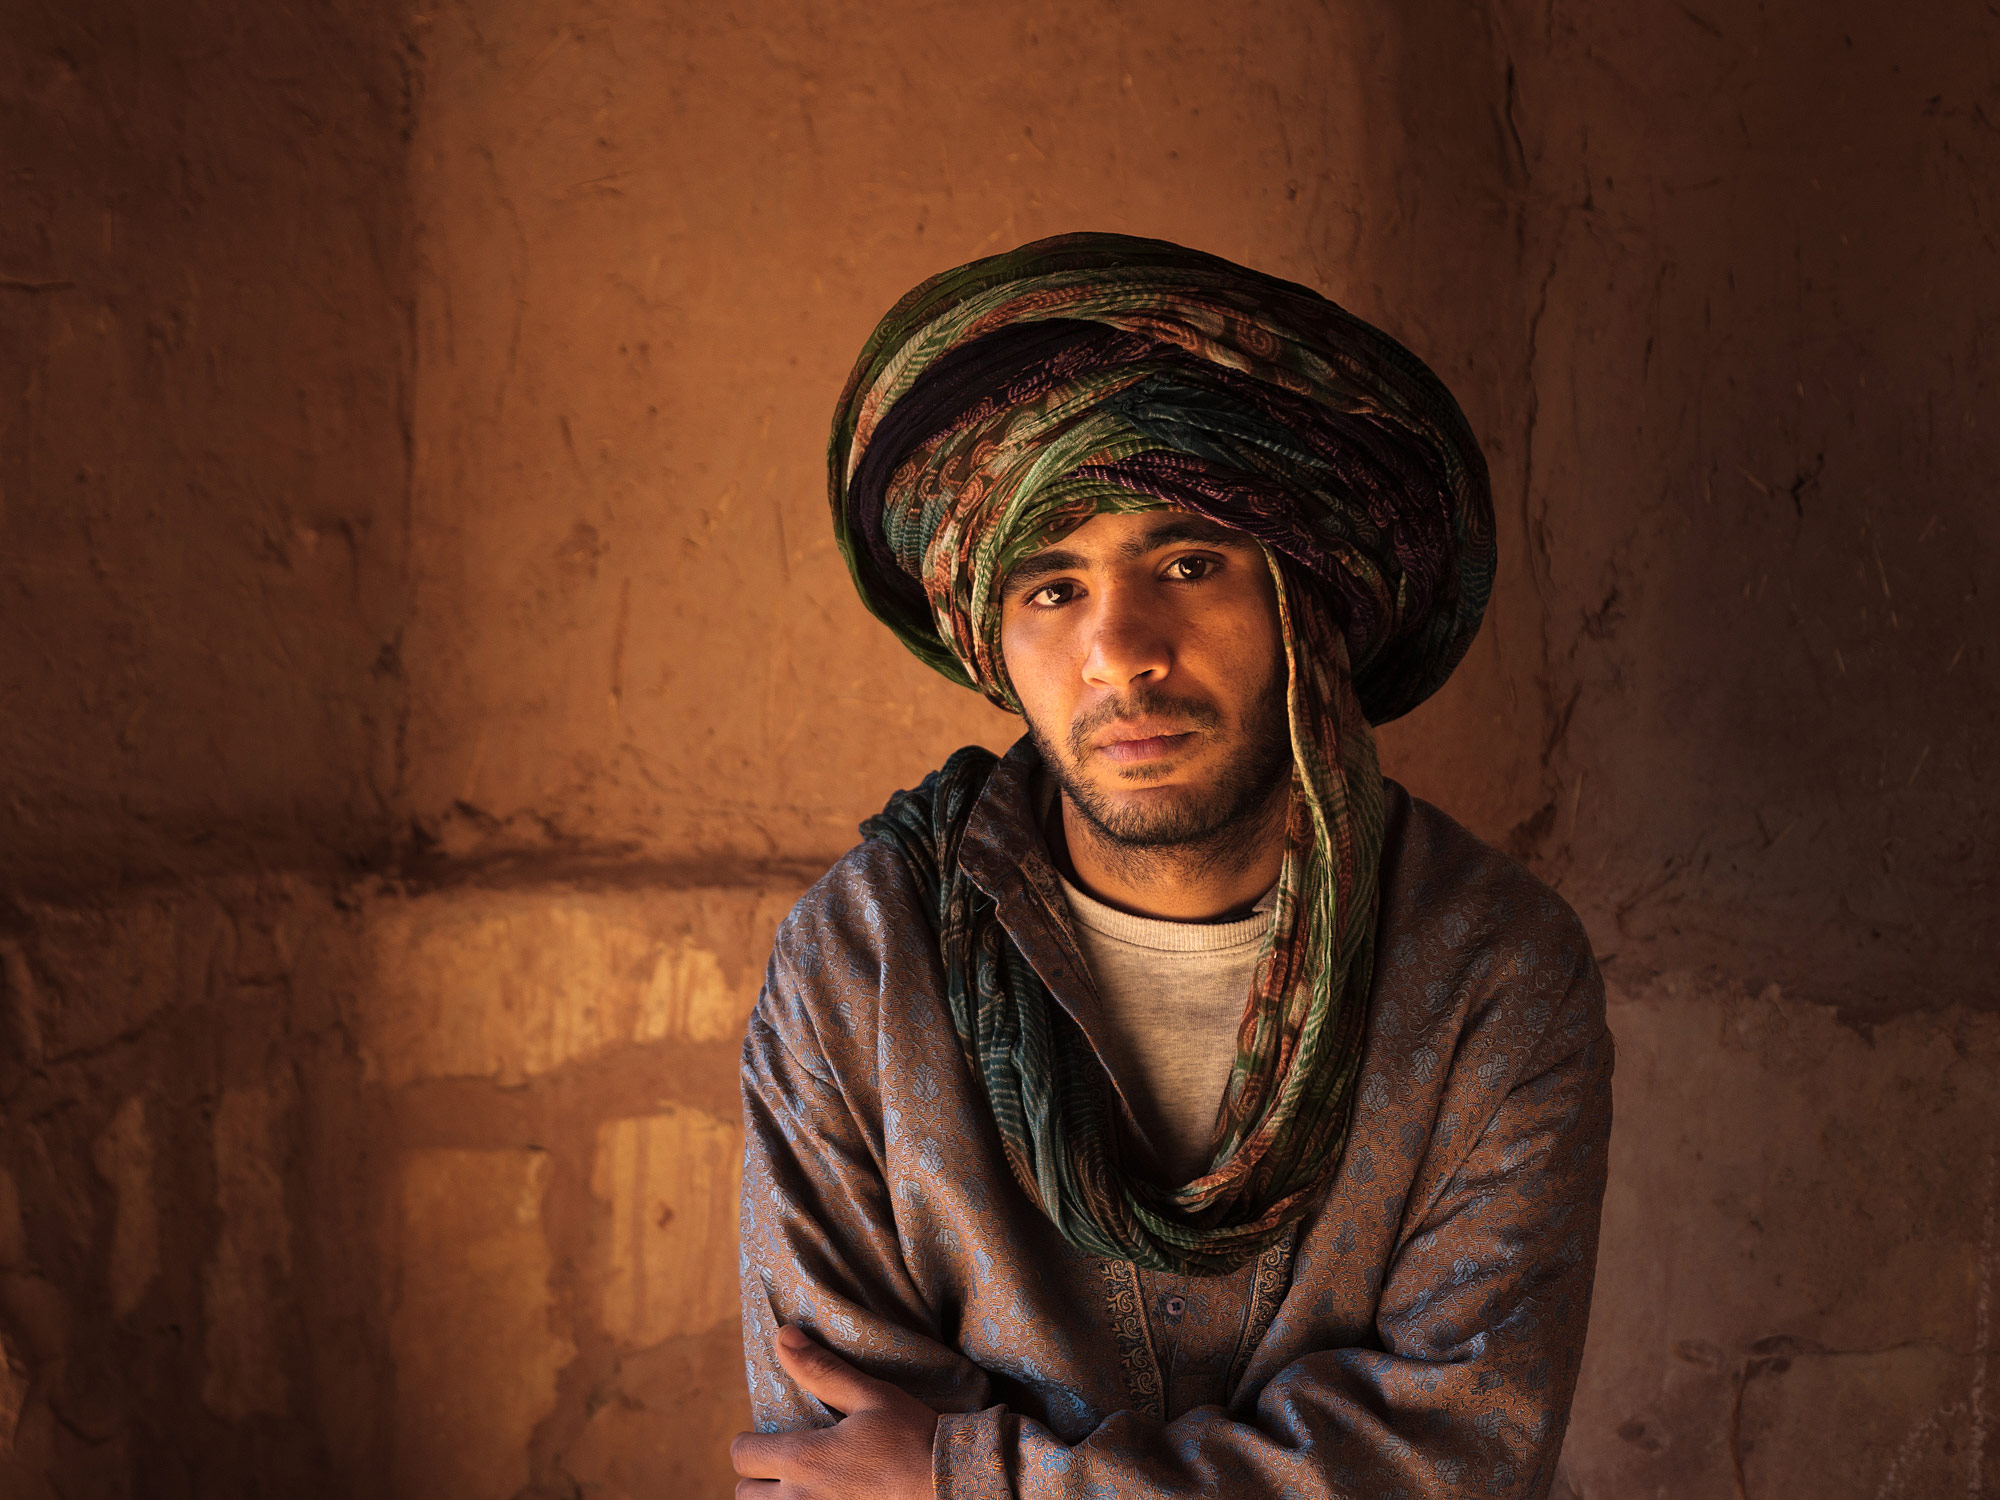 Morocco ~ Portraits in the Kasbahs of the Atlas Mountains